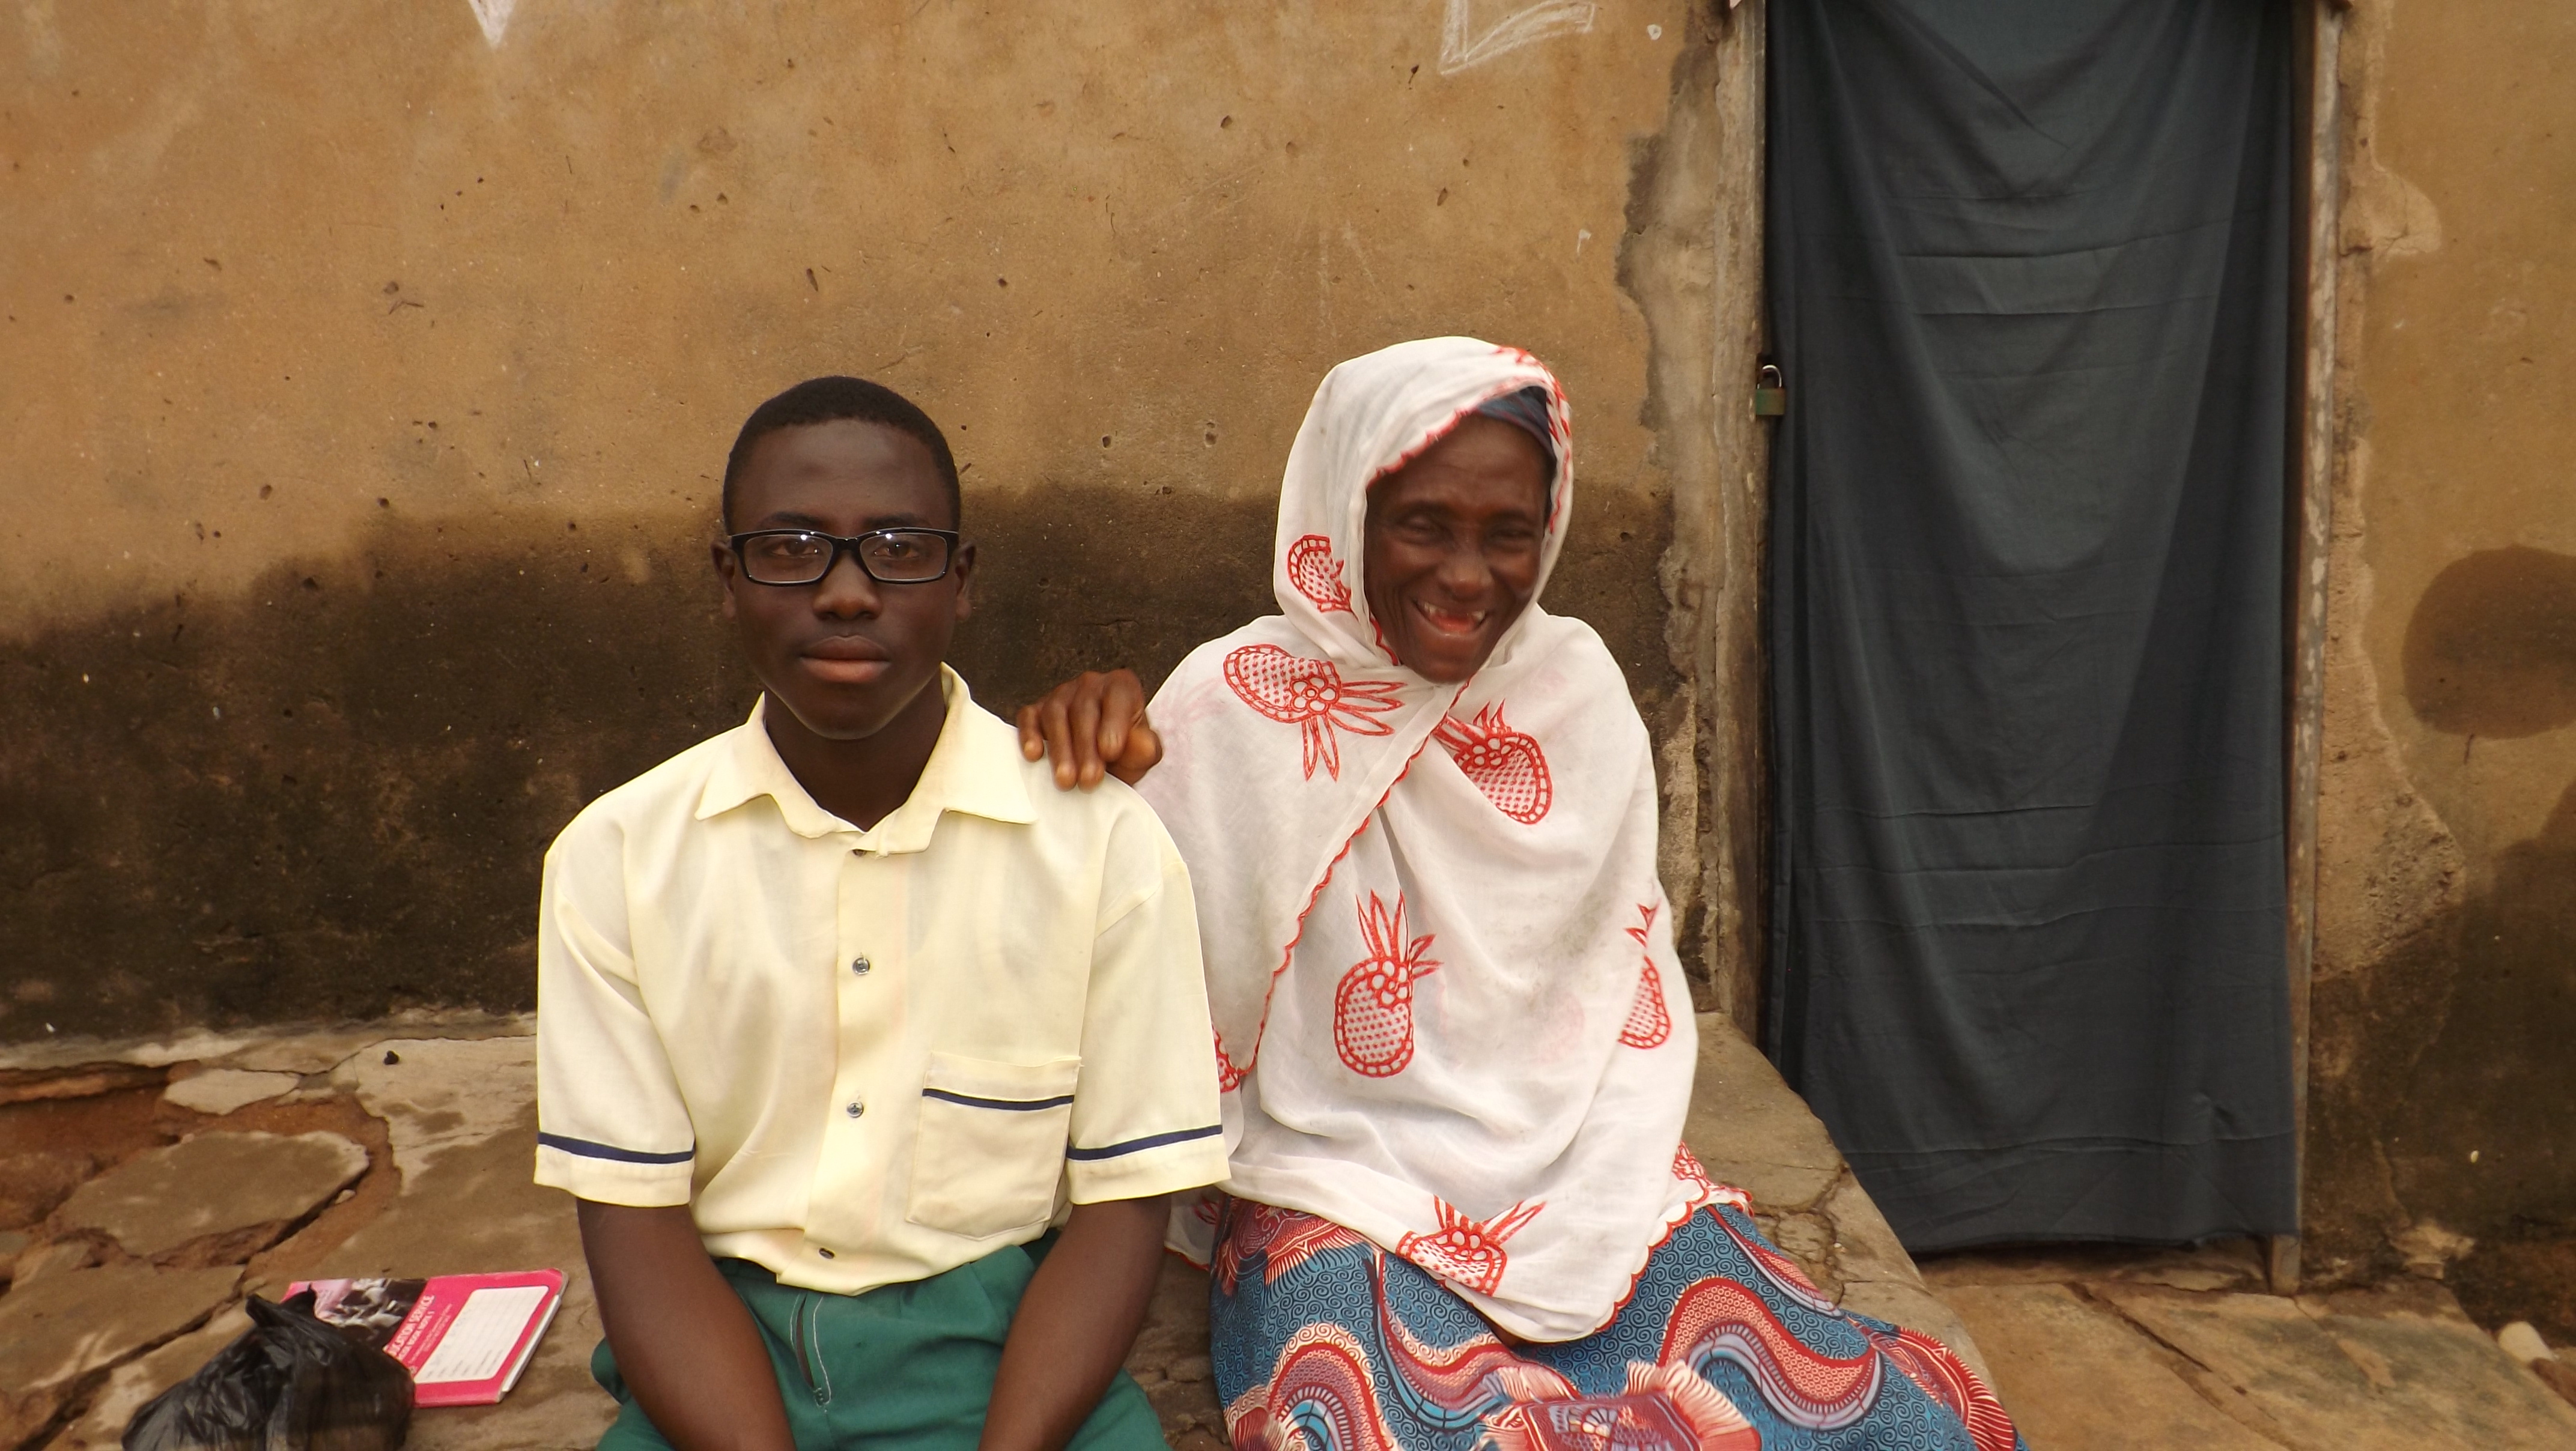 Young boy in Ghana receives eyeglasses free of charge thanks to Operation Eyesight program